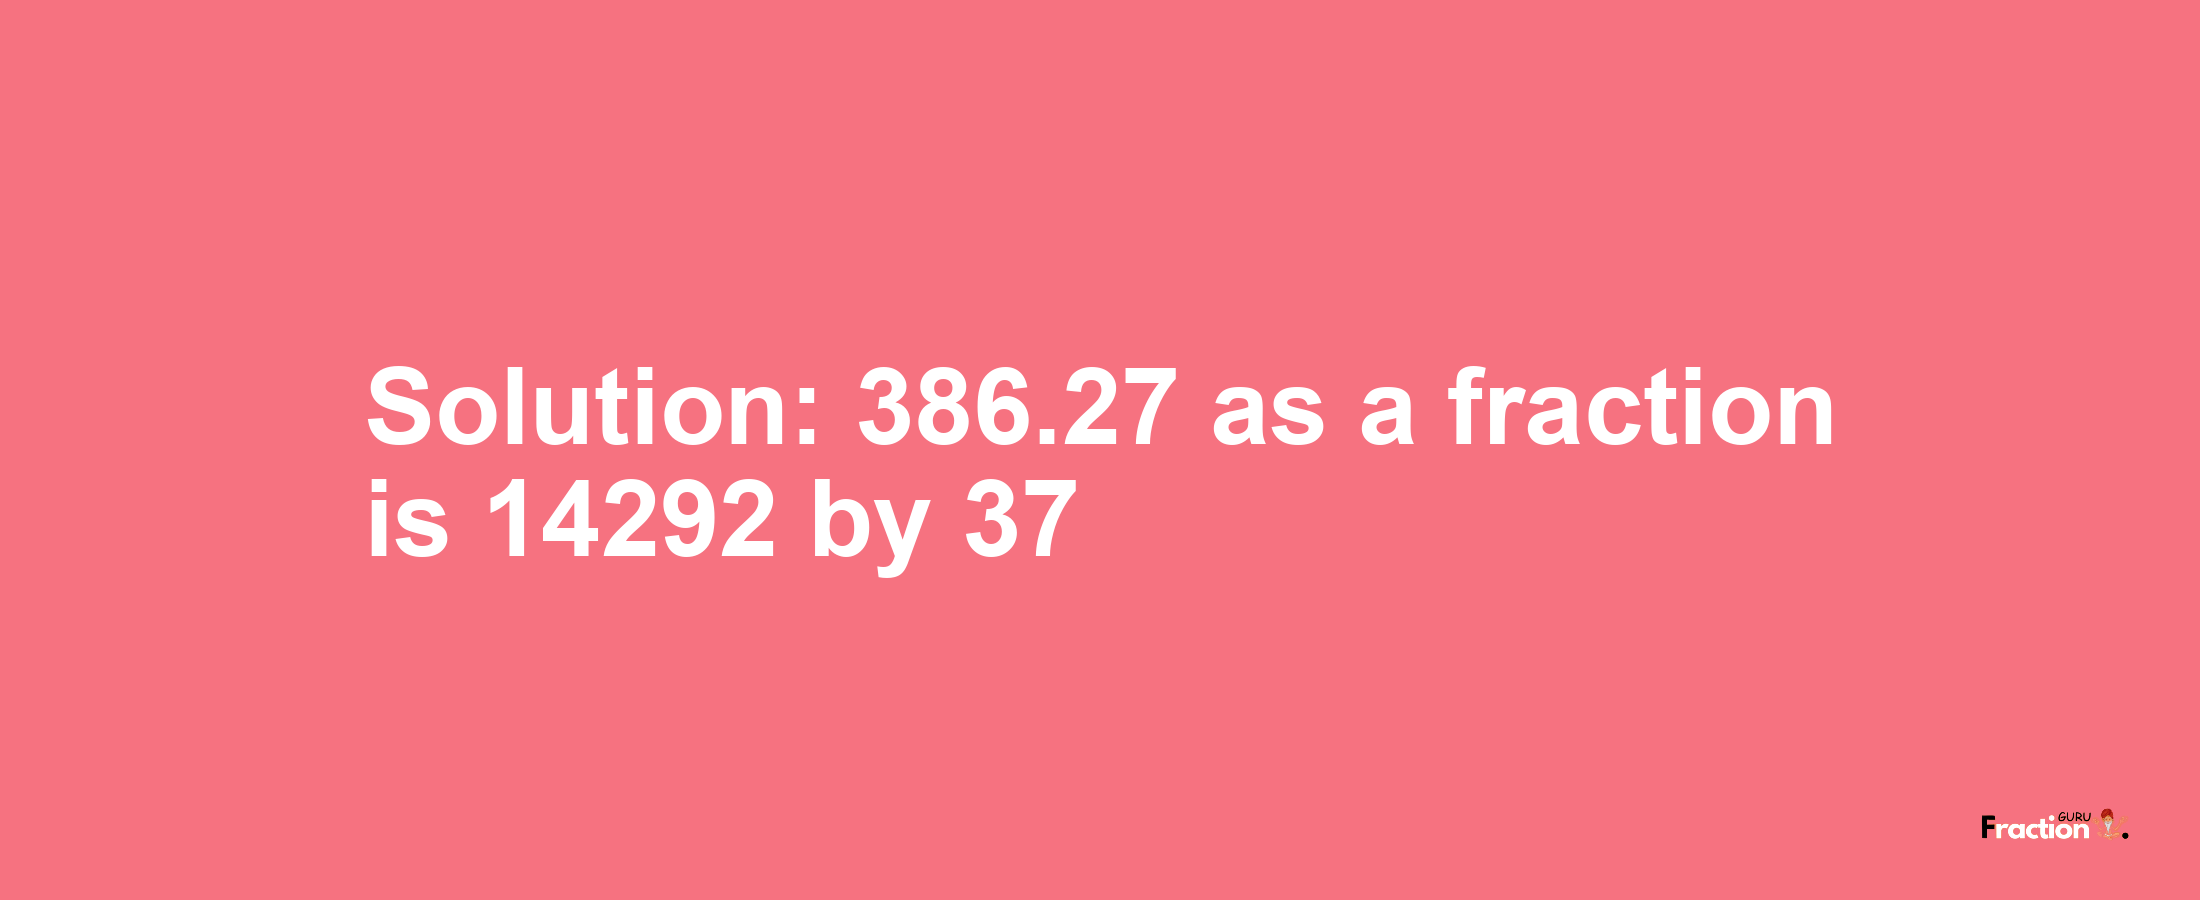 Solution:386.27 as a fraction is 14292/37